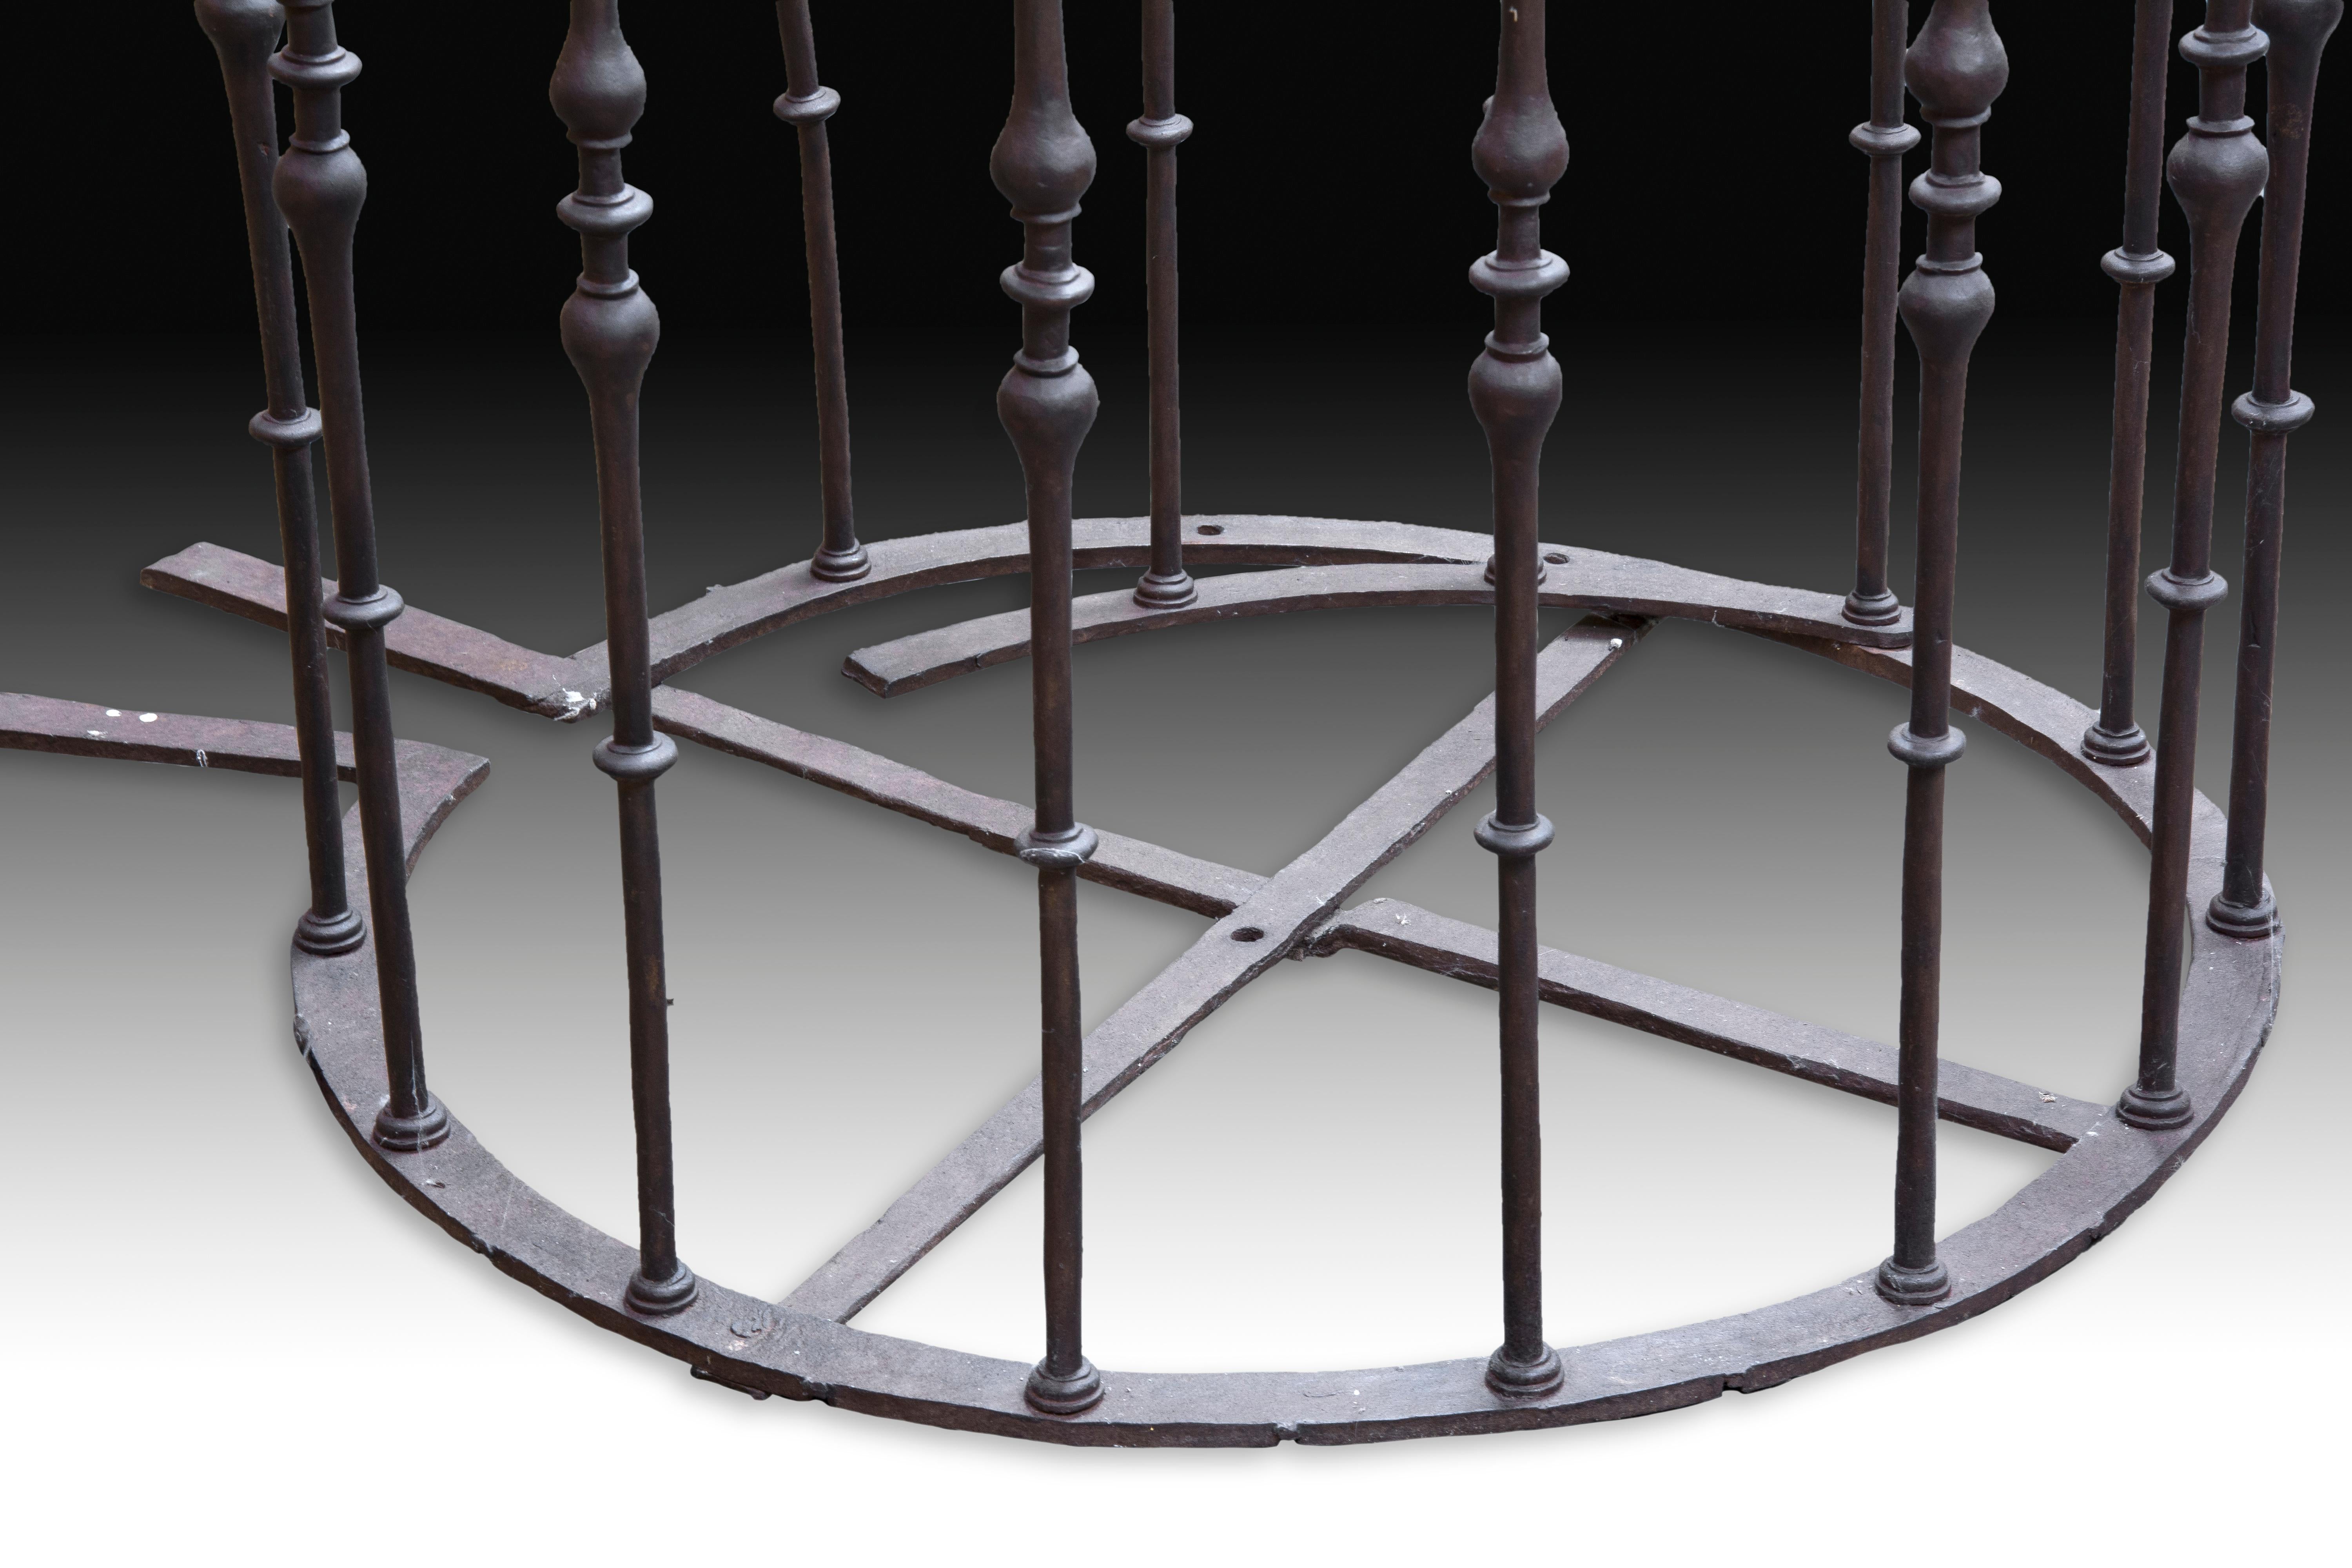 Wrought iron grating with thirteen bars with double pear and discs in their shafts, arranged in a circle with bars of the same flat material (circular and cross combined at the base for a firmer grip, and arranged in a circle at the top), that would